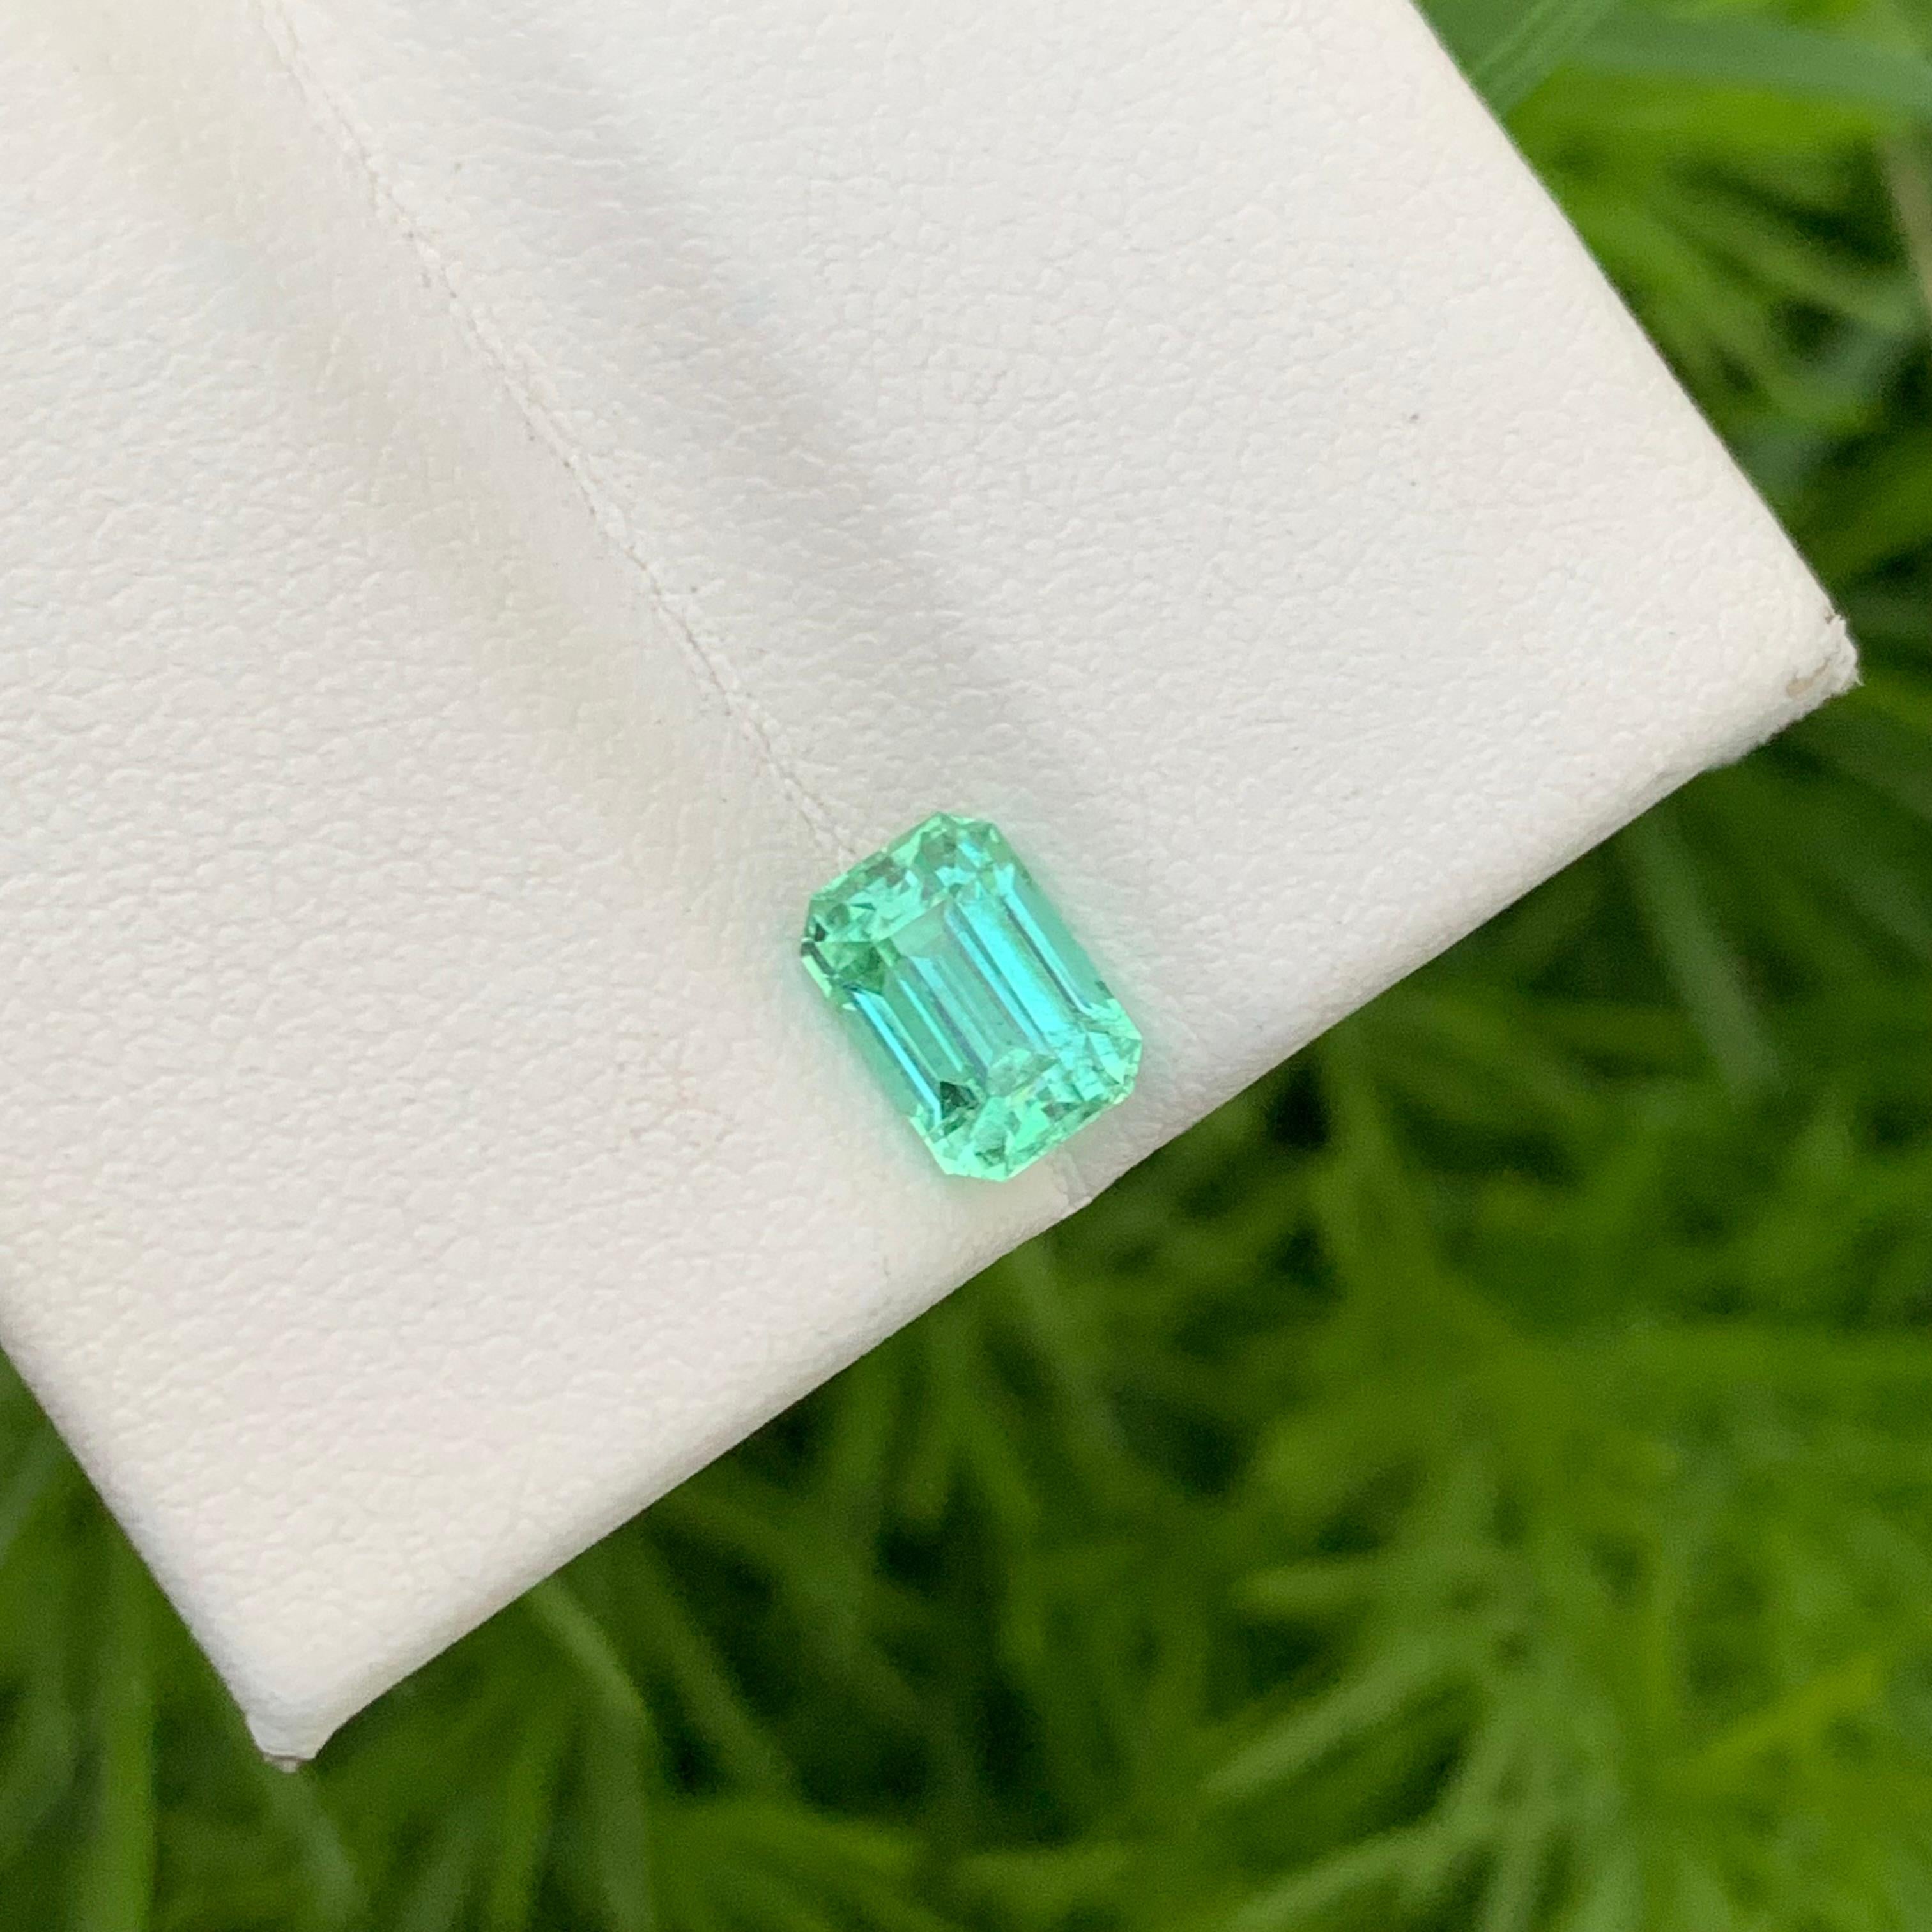 Loose Tourmaline 
Weight: 1.50 Carats 
Dimension: 7.4x5.1x4.8 Mm
Origin; Afghanistan
Shape: Emerald 
Color: Green
Treatment: Non
Certificate: On Customer Demand
Tourmaline Mint is a stunning gemstone that captivates with its vibrant colors and